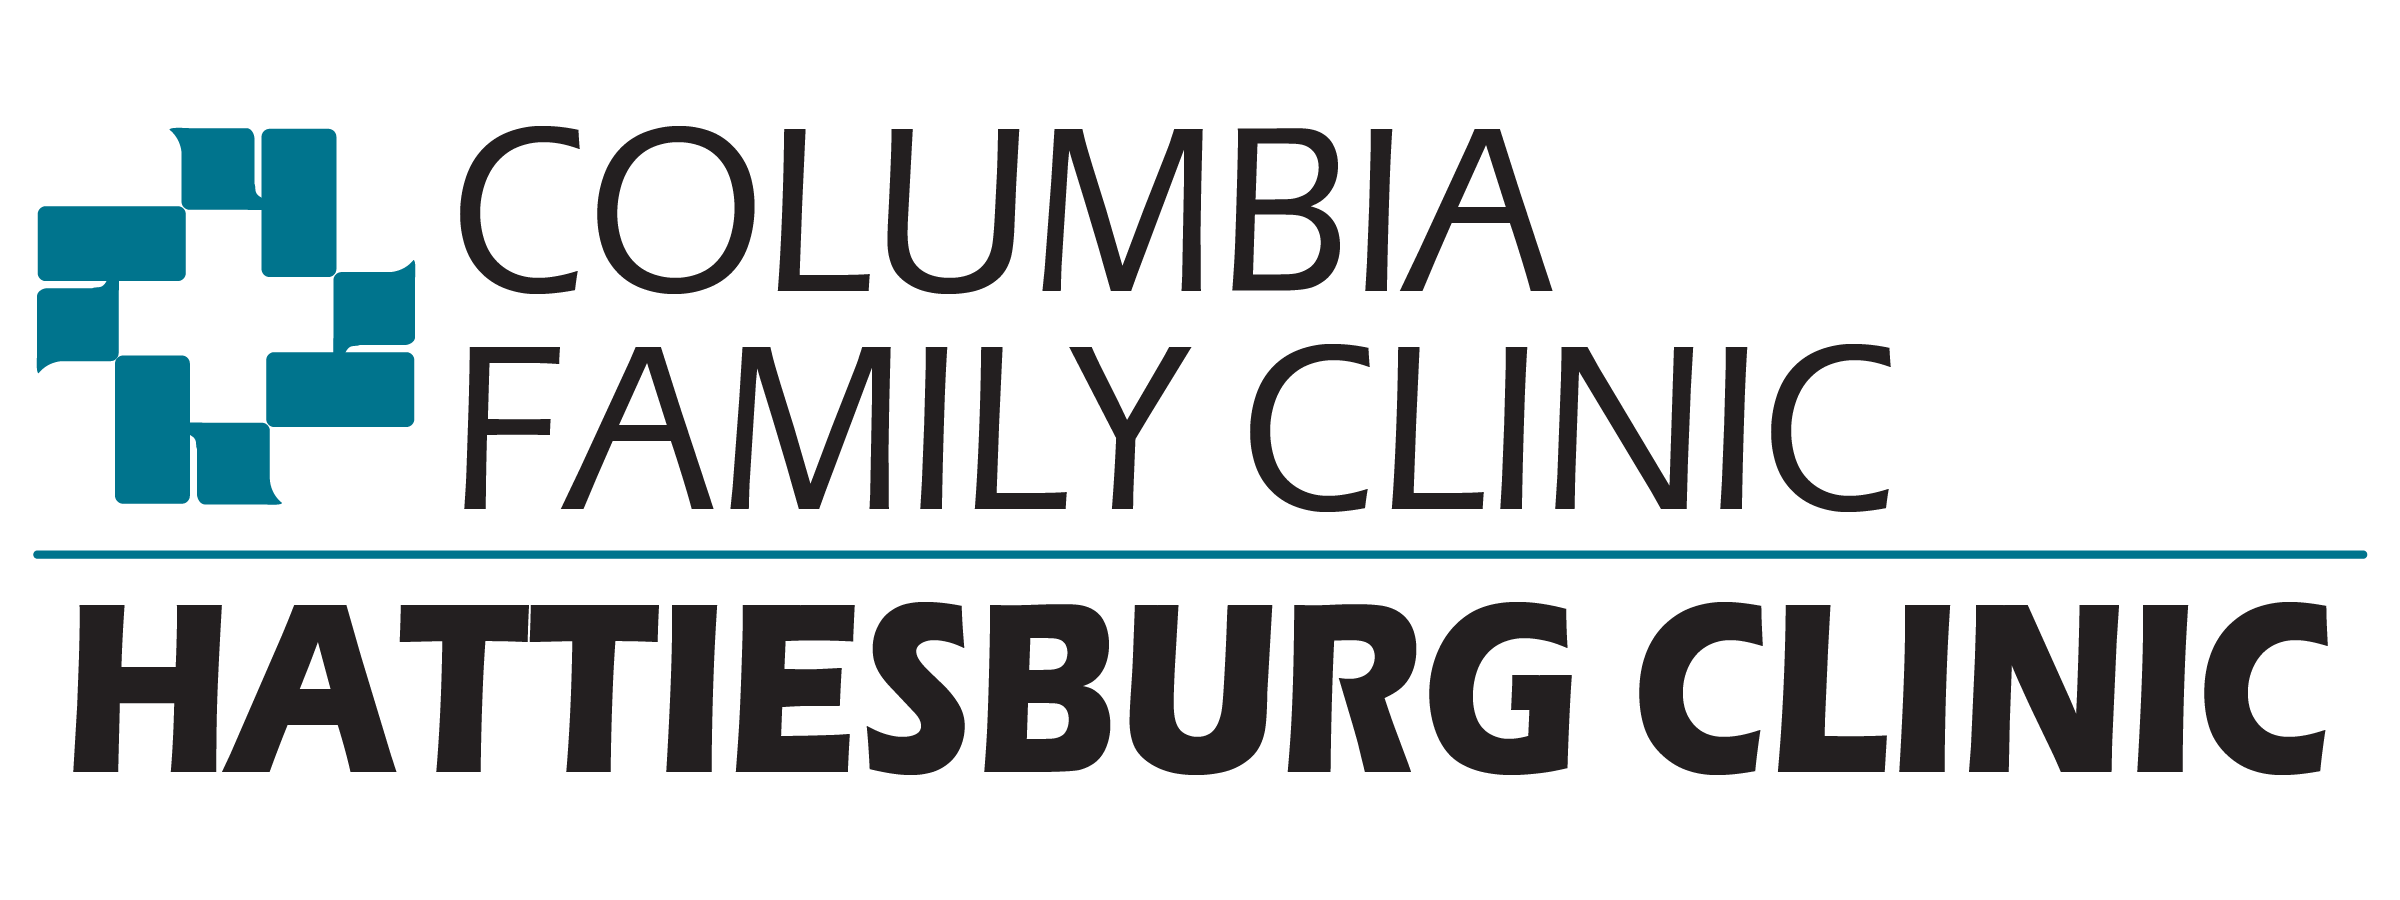 Collins Family Clinic logo